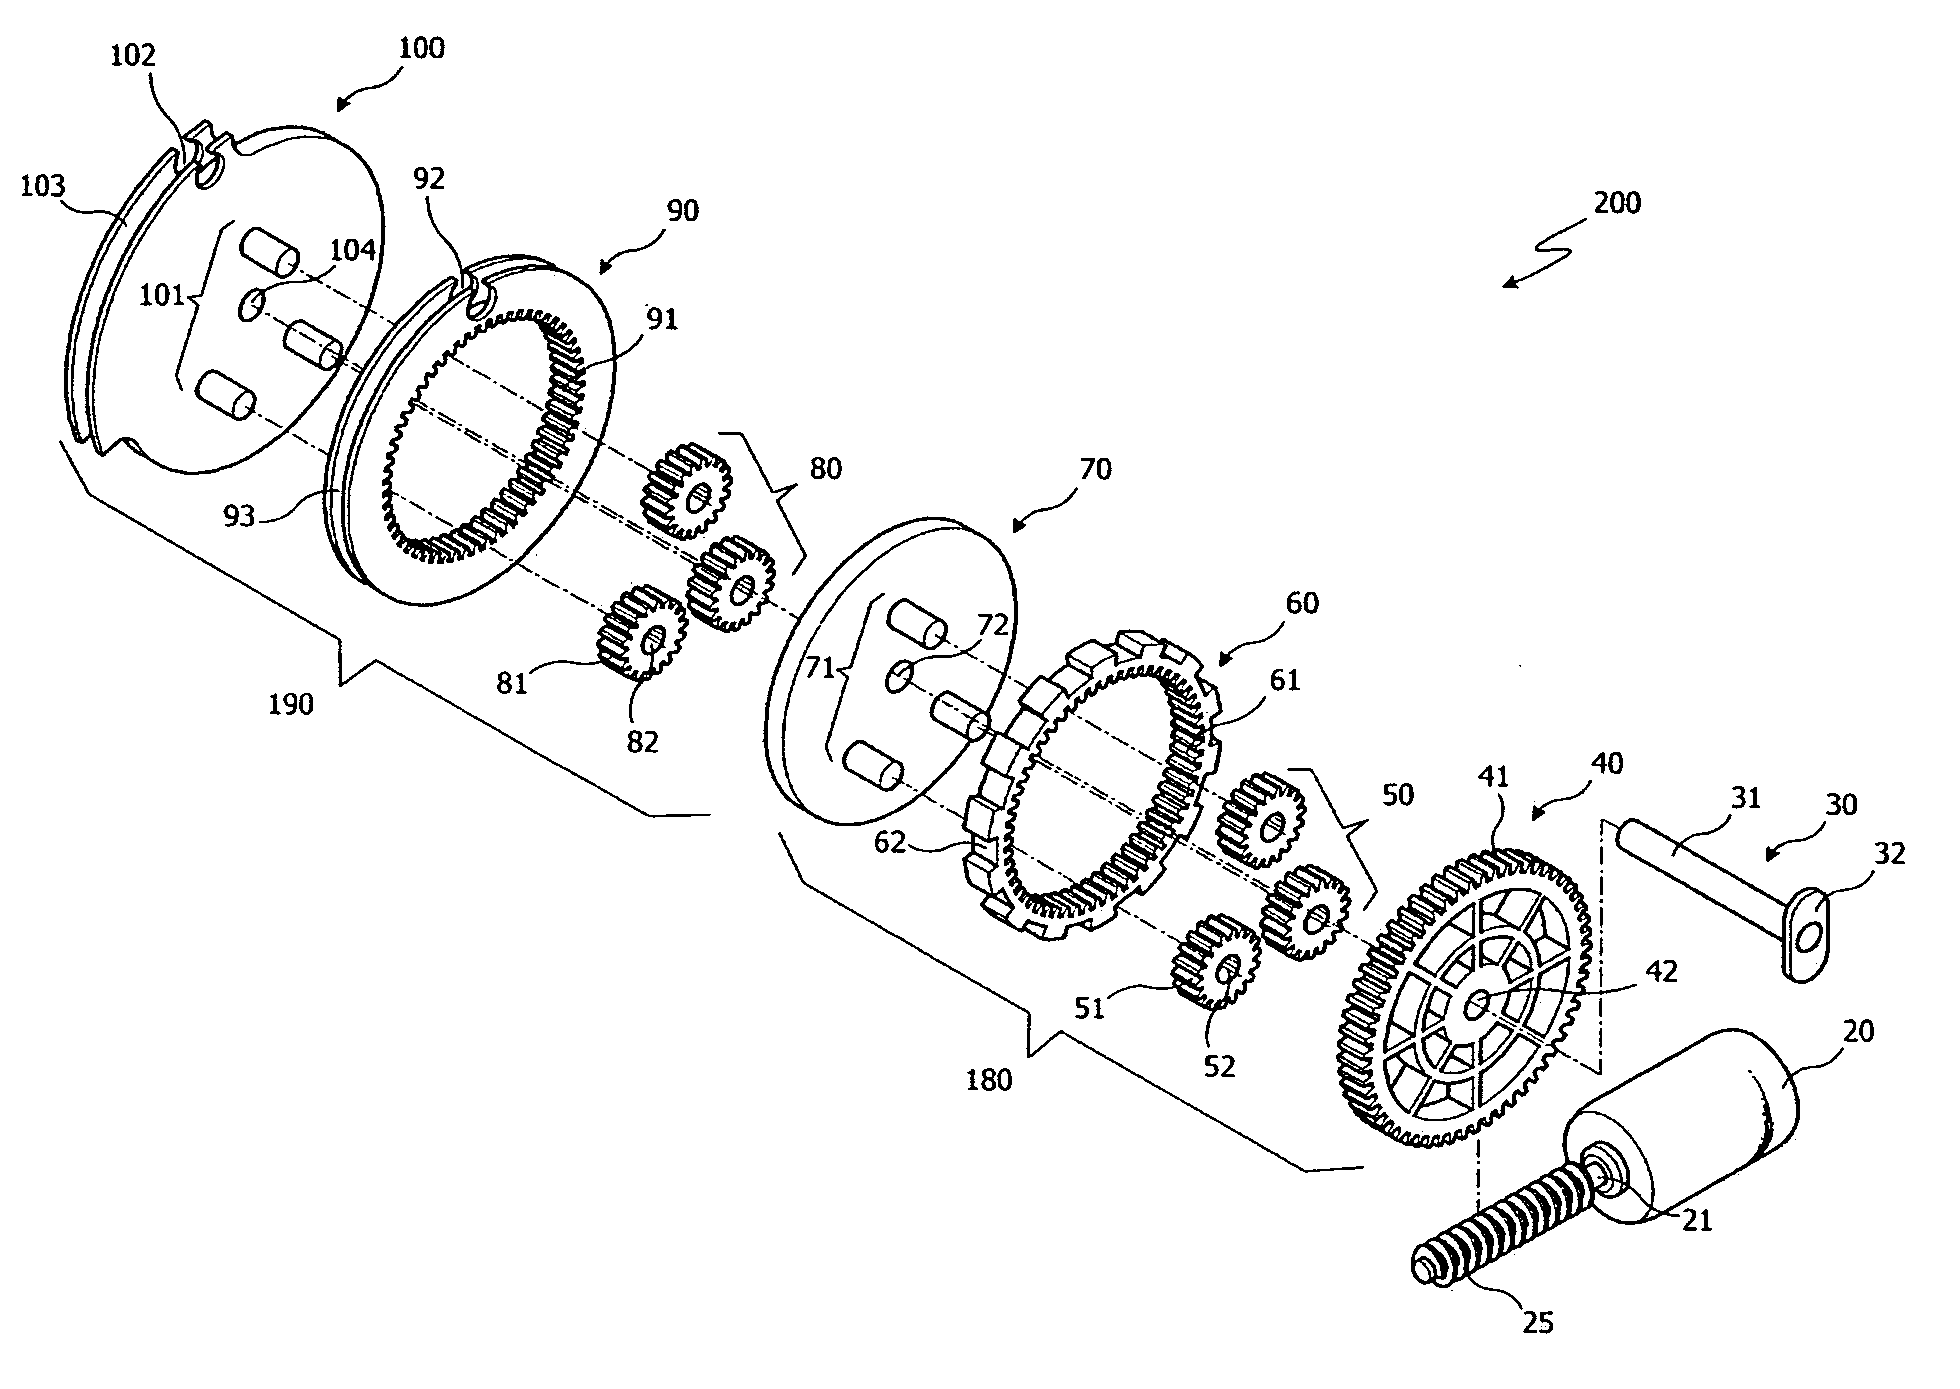 Cable-driving apparatus and parking brake system using planet gear assembly